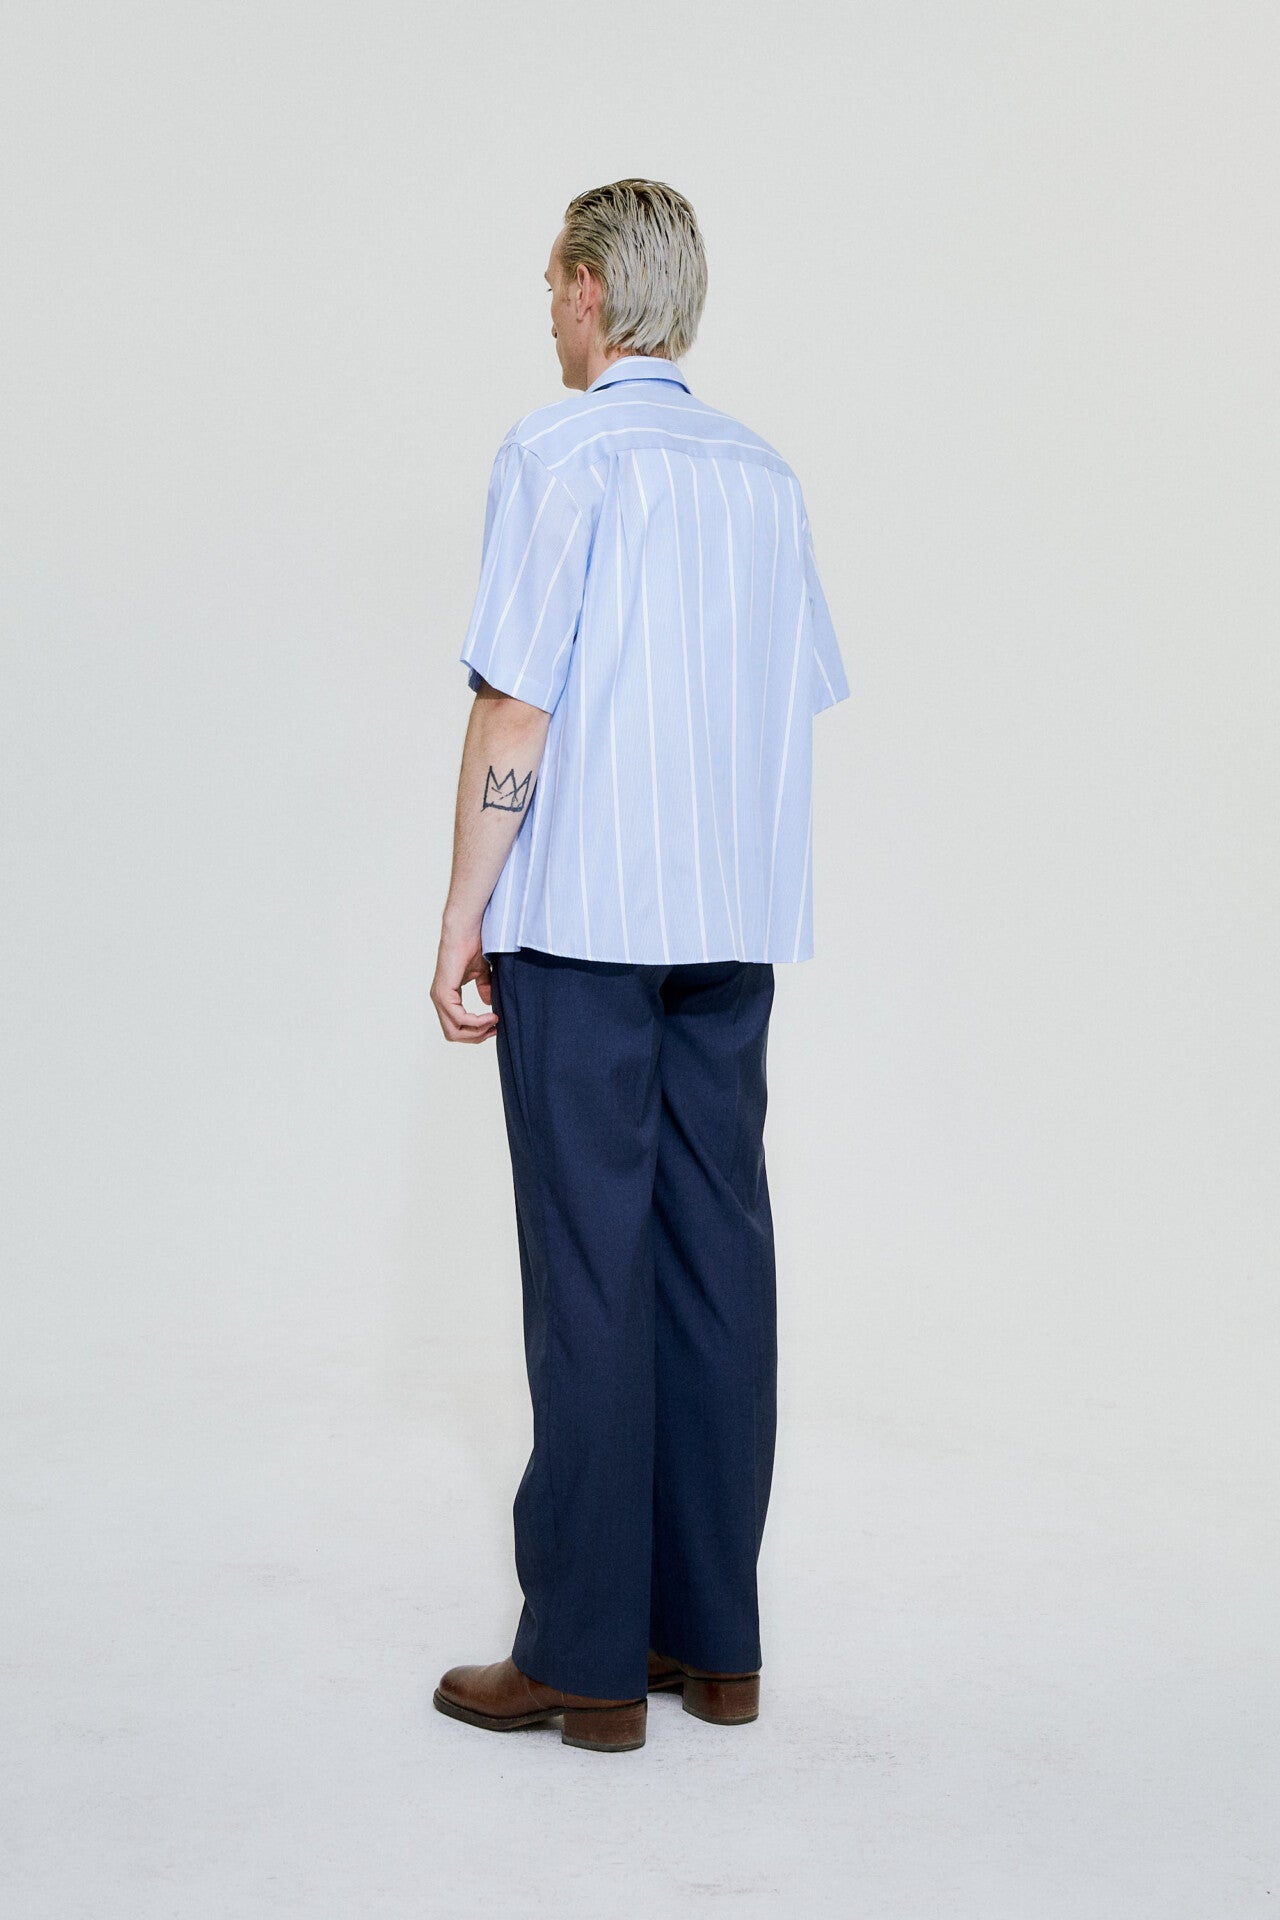 Ode shirt in stripe by goutez